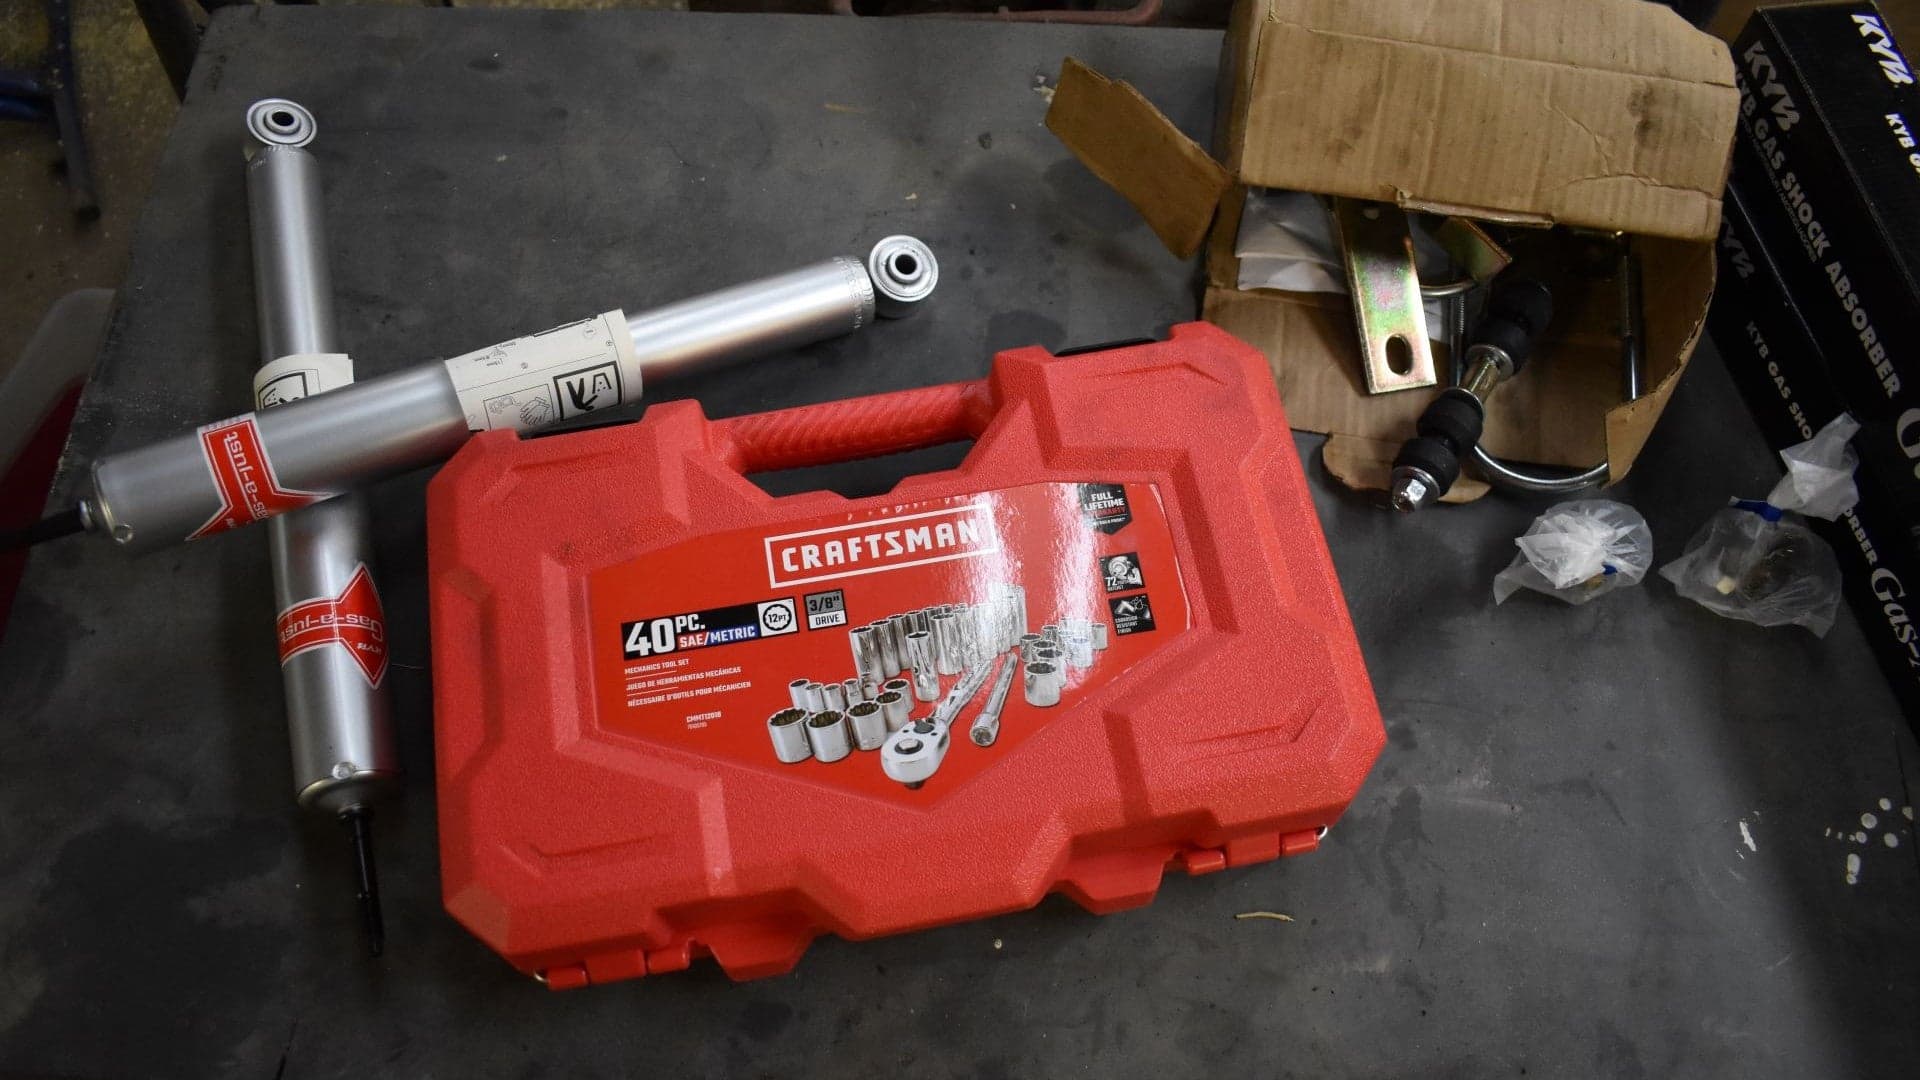 Does the New Craftsman 40-Piece Mechanic’s Tool Set Live Up to Its Former Self?